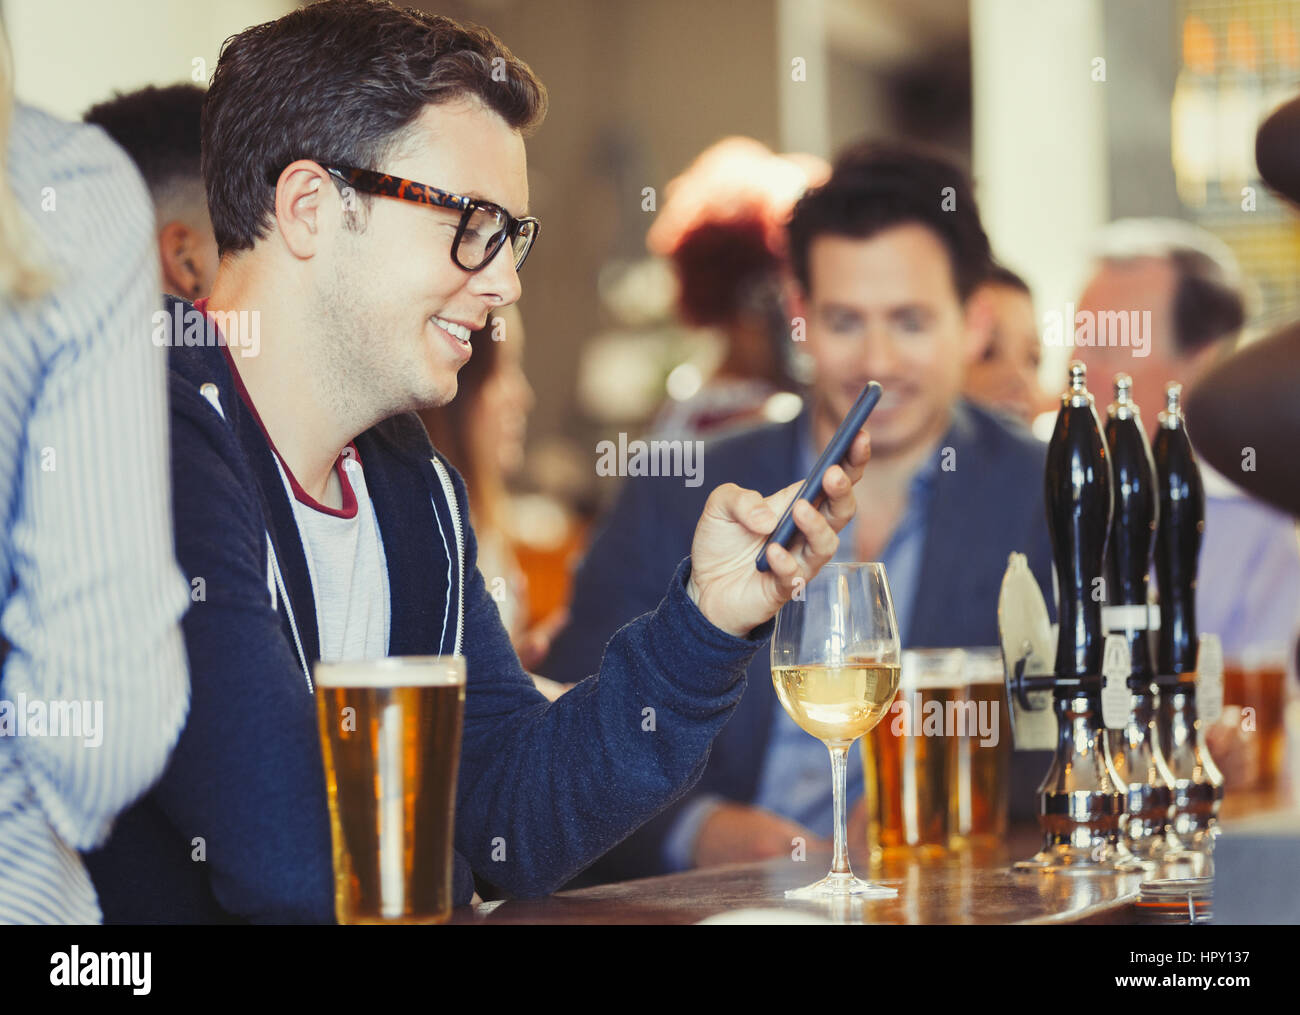 Smiling man texting with cell phone drinking wine at bar Stock Photo